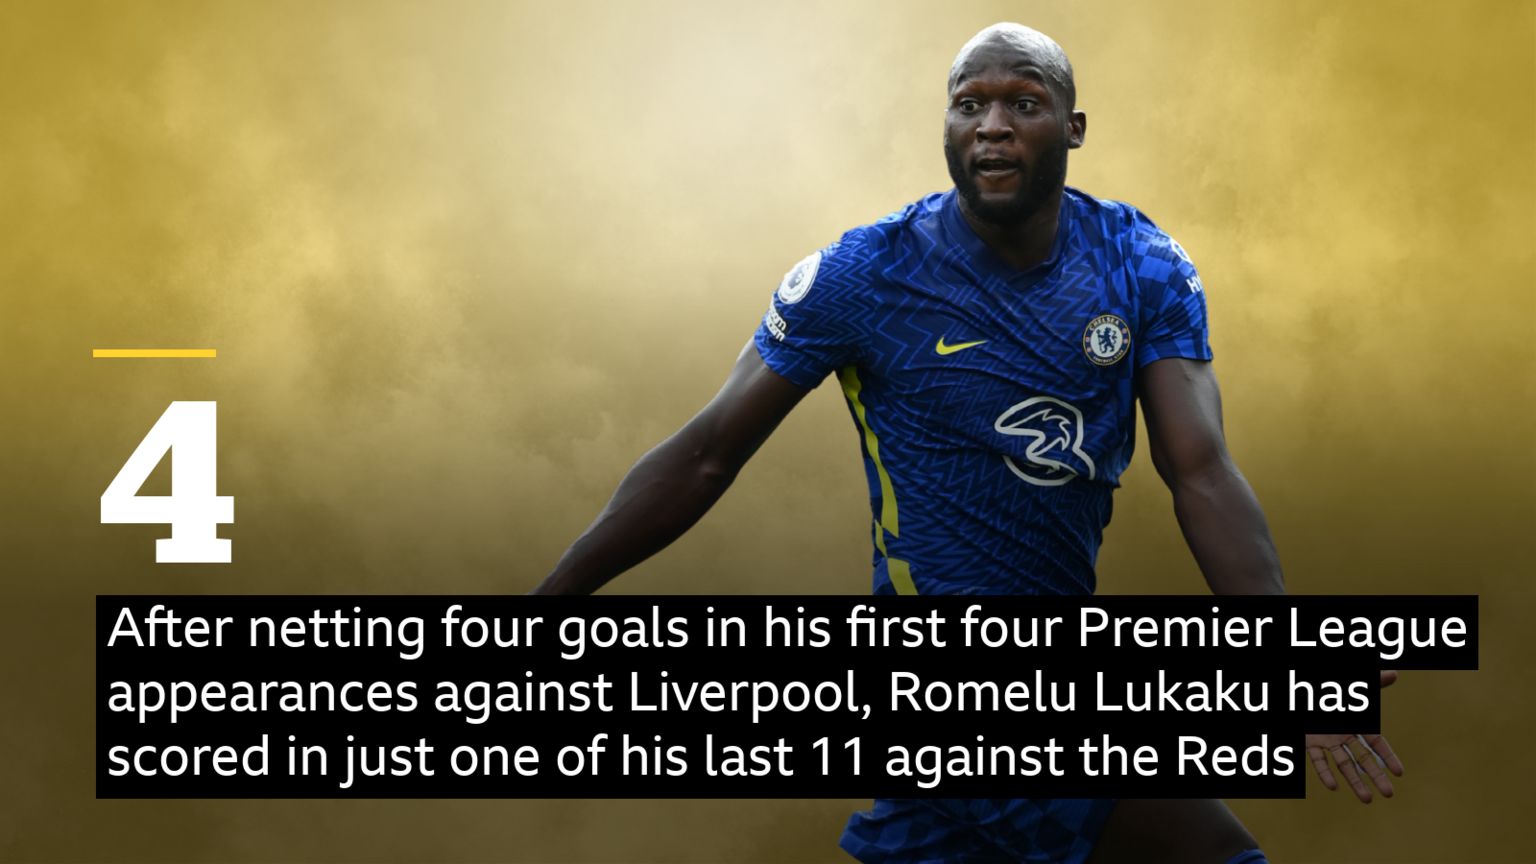 Romelu Lukaku stat: ‎‎‏‏After netting four goals in his first four Premier League appearances against Liverpool, Romelu Lukaku has scored in just one of his last 11 against the Reds